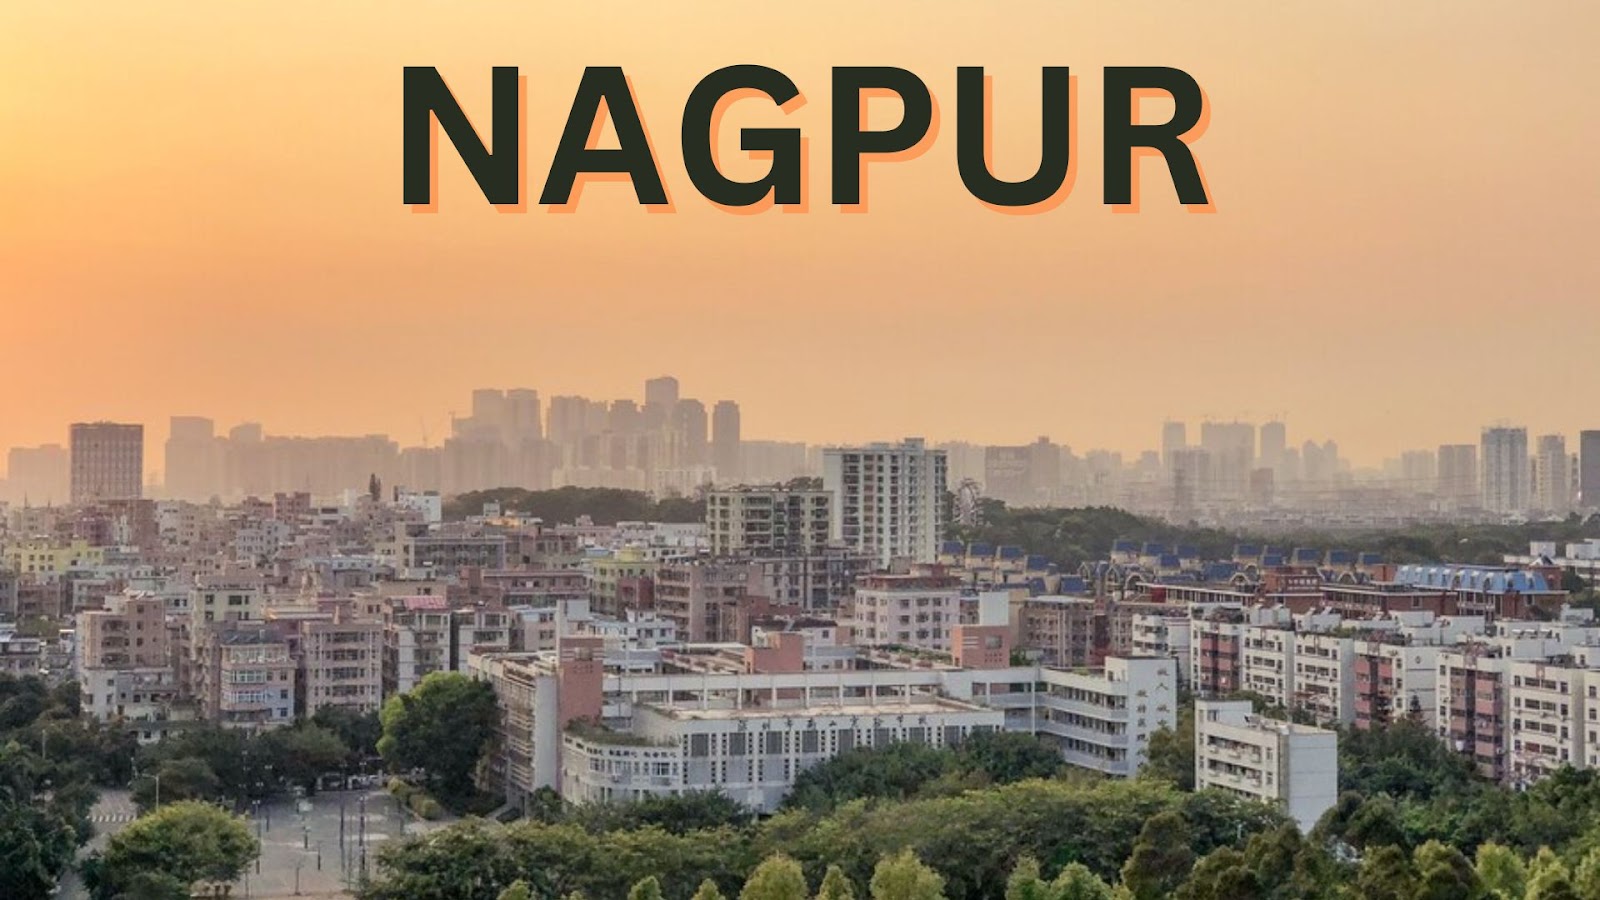 One of the best locations to buy a house is going to be Nagpur.